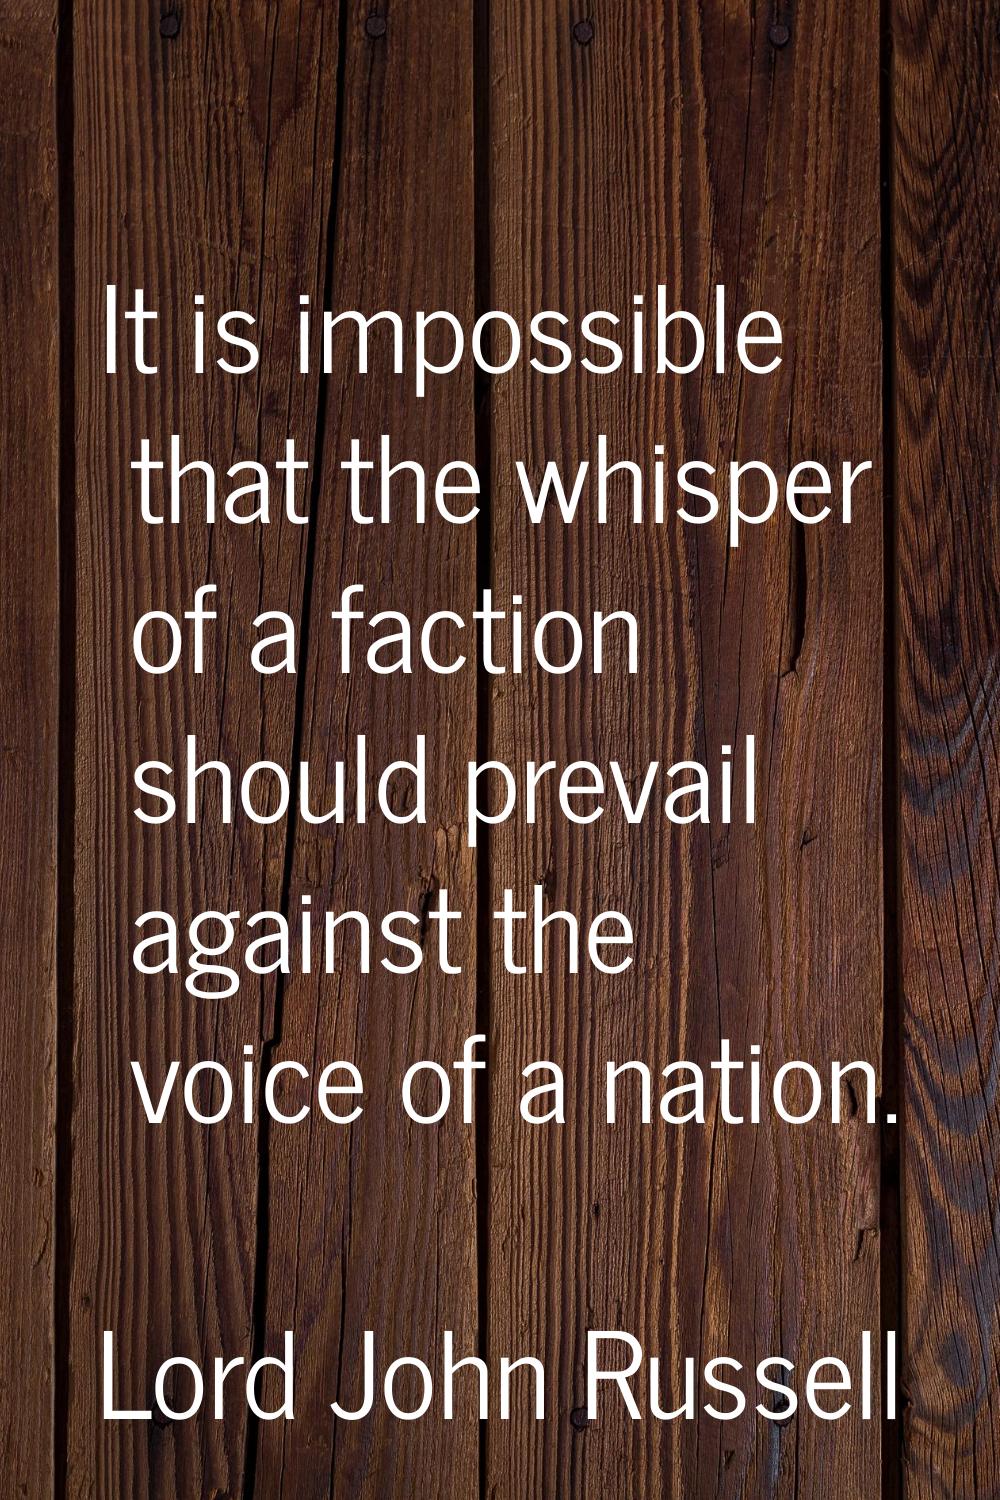 It is impossible that the whisper of a faction should prevail against the voice of a nation.